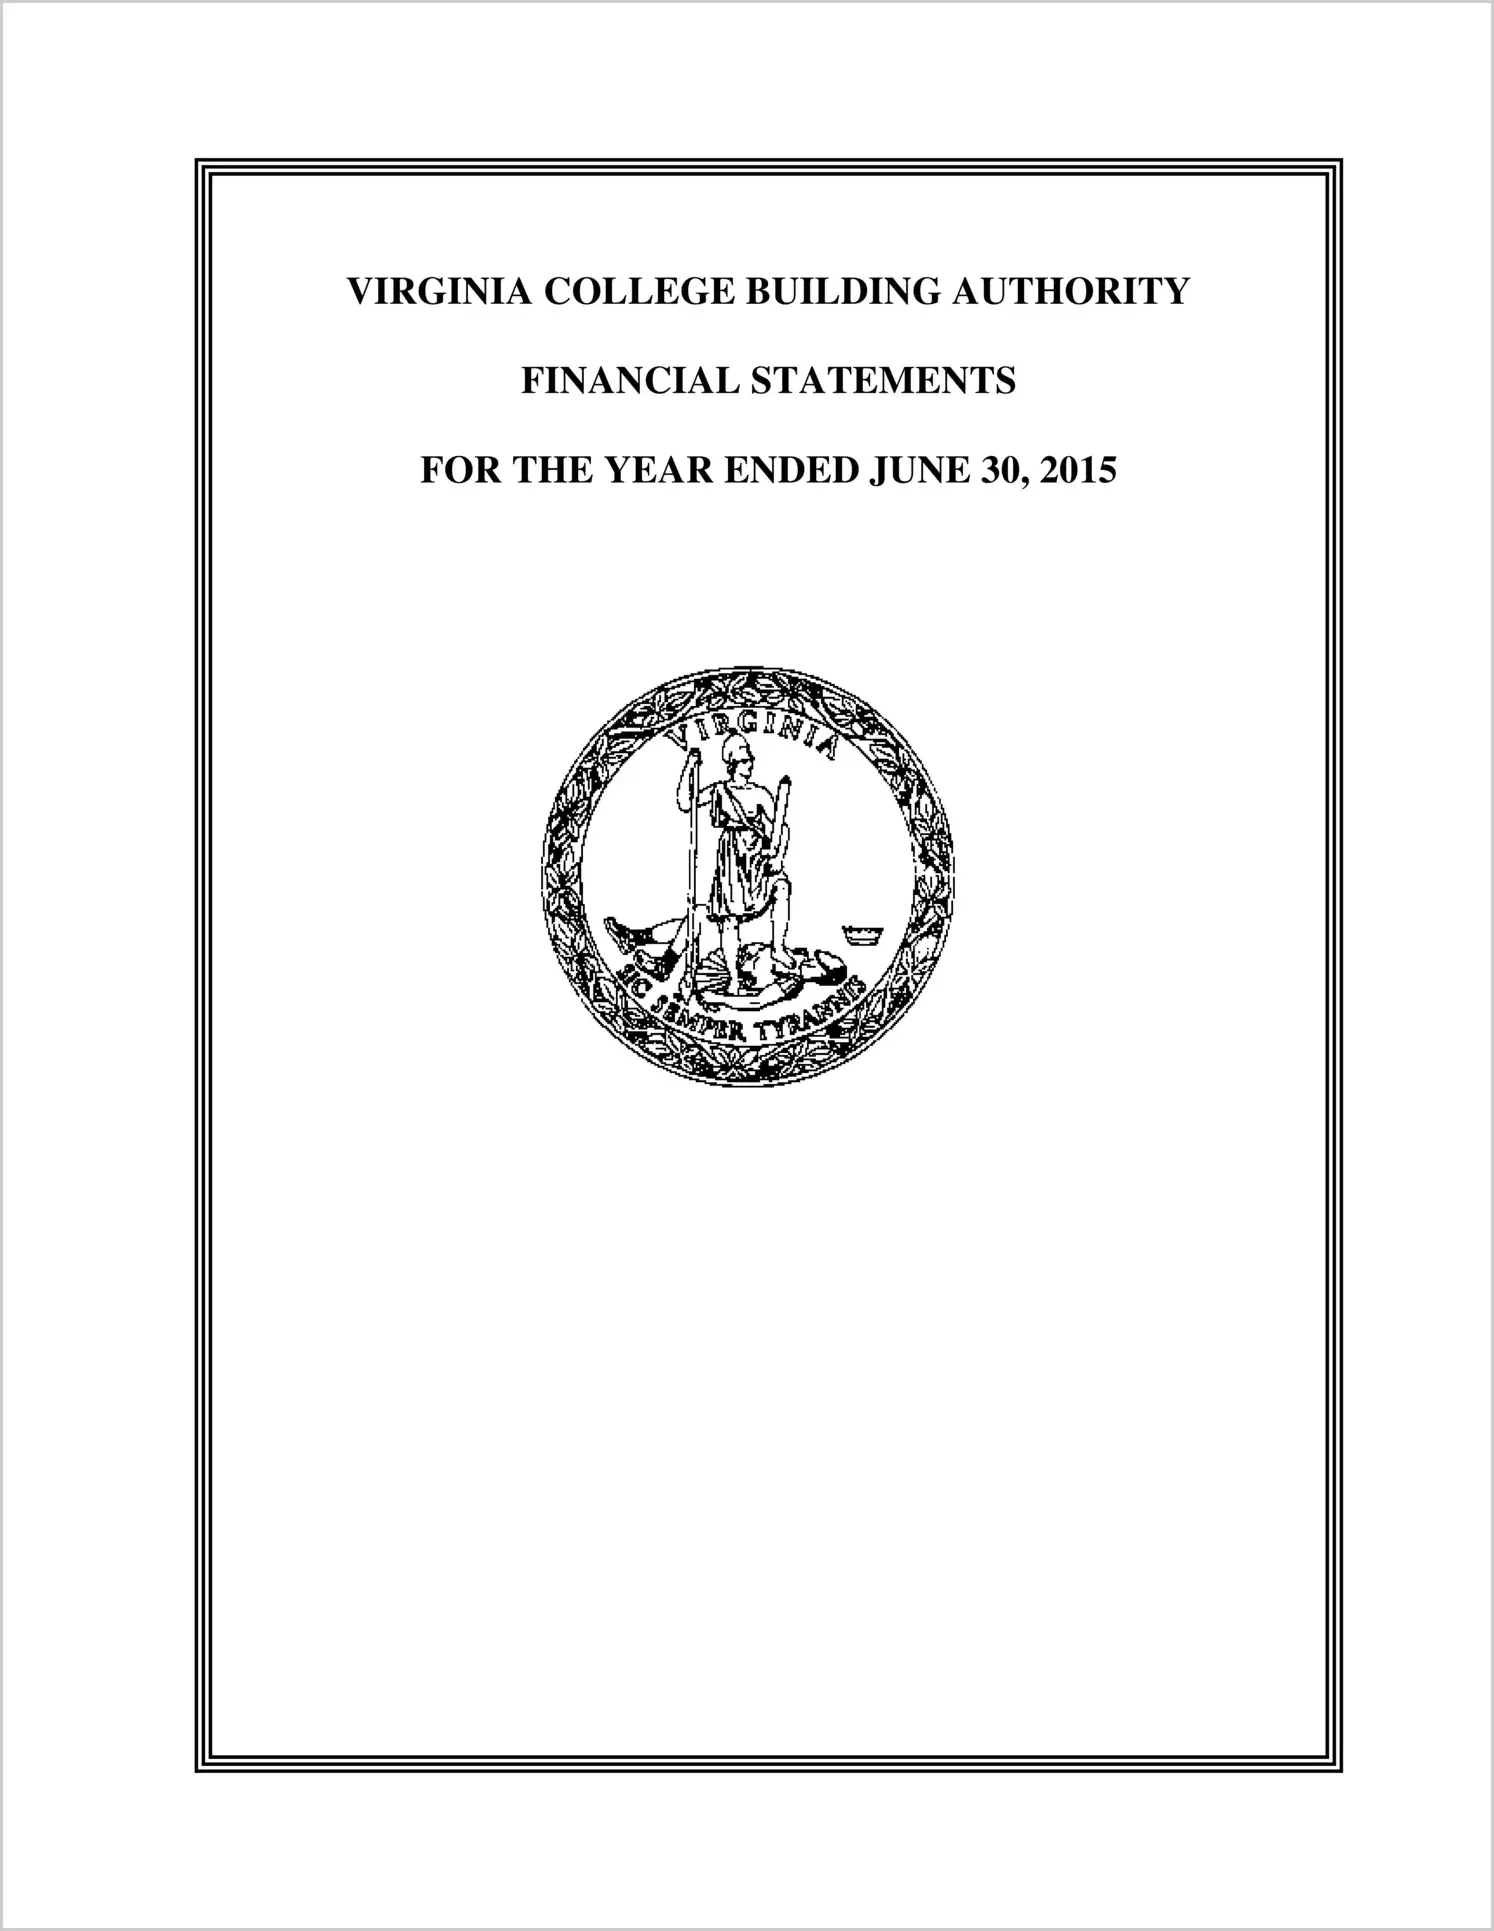 Virginia College Building Authority Financial Statements for the year ended June 30, 2015